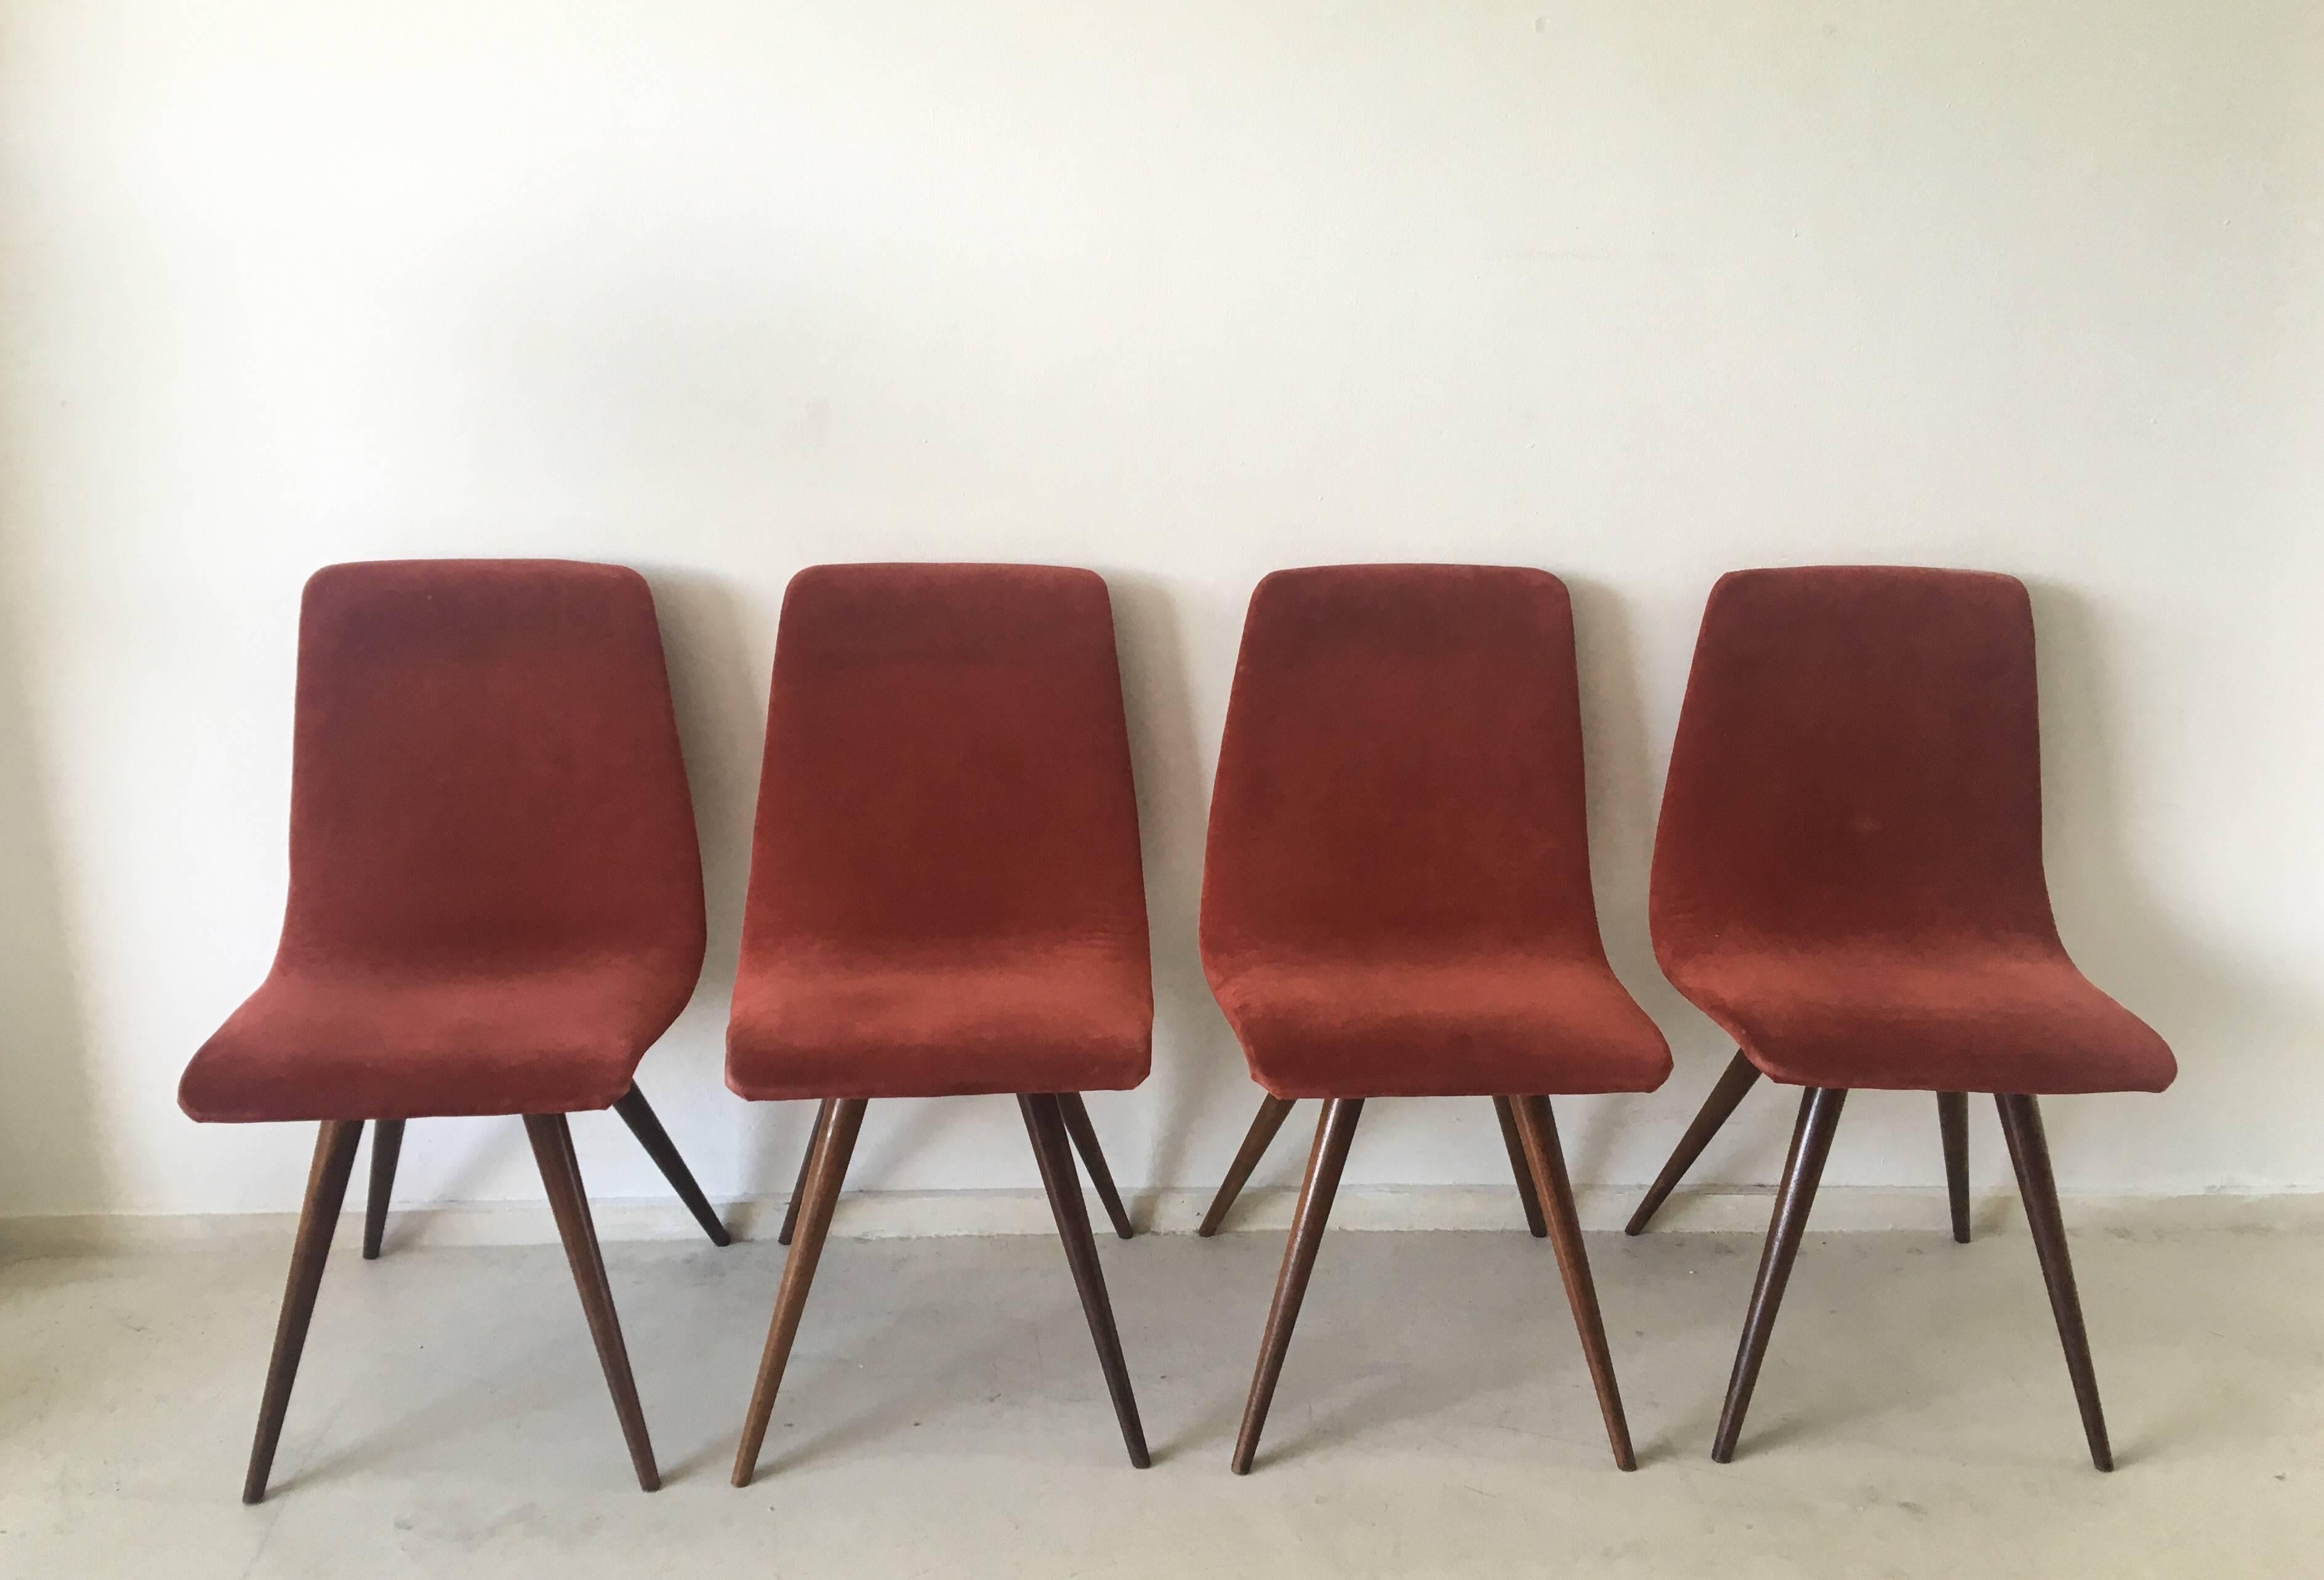 Dutch Rare Mid-Century Dining Chairs, Attributed to Gj Van Os, 1950s